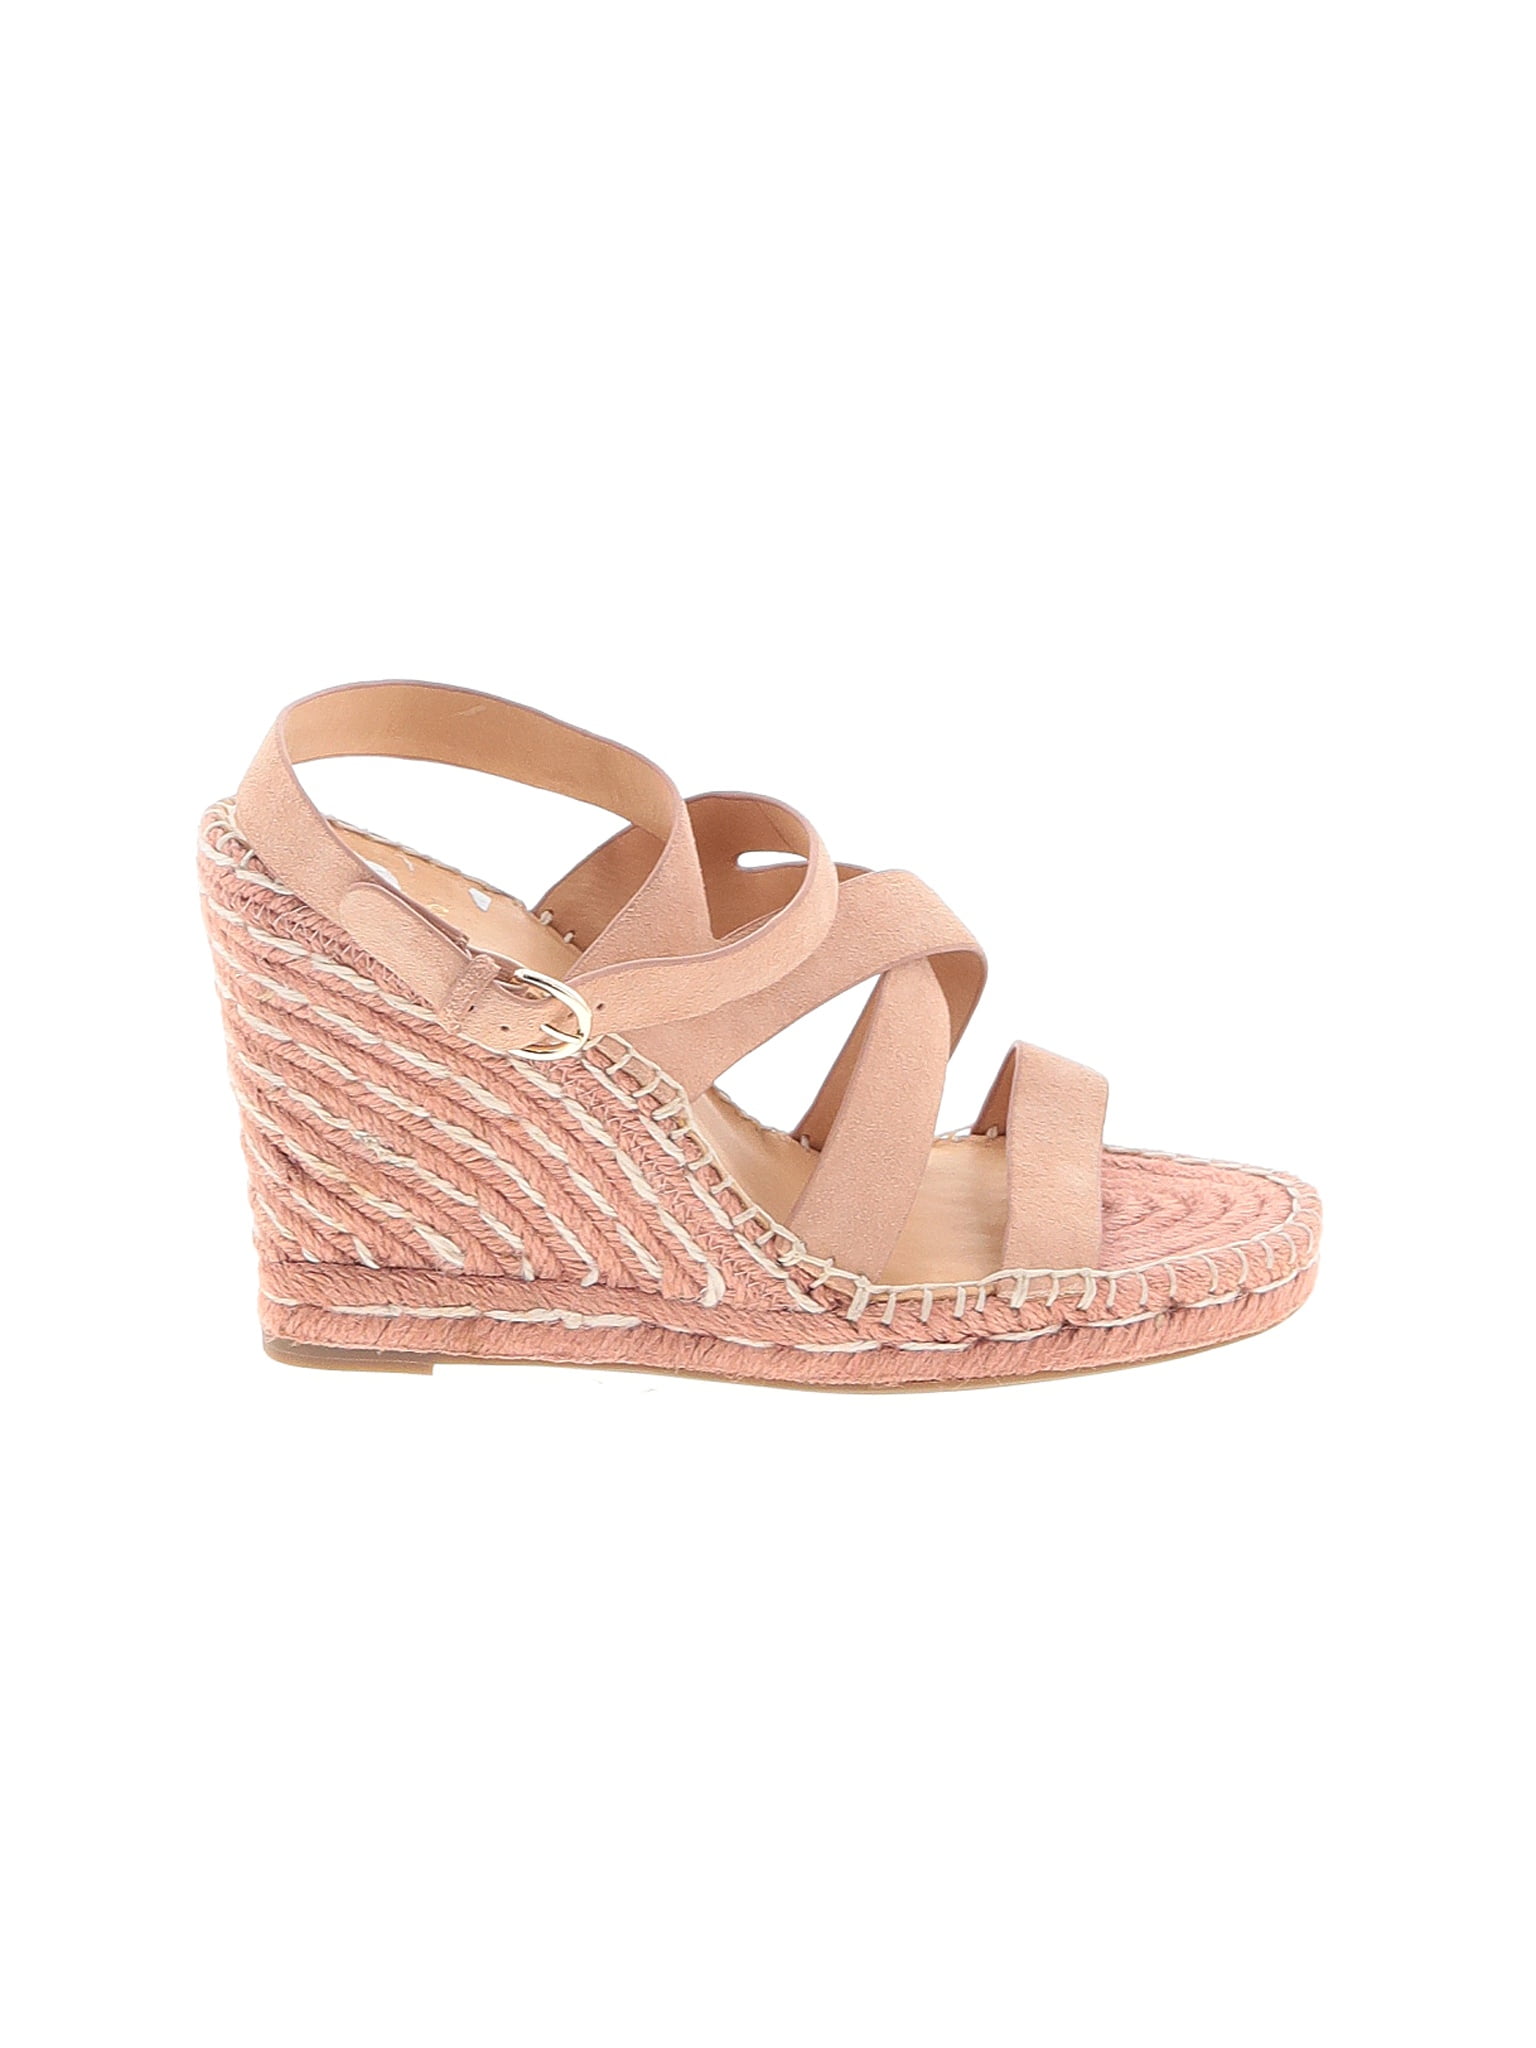 joie wedges